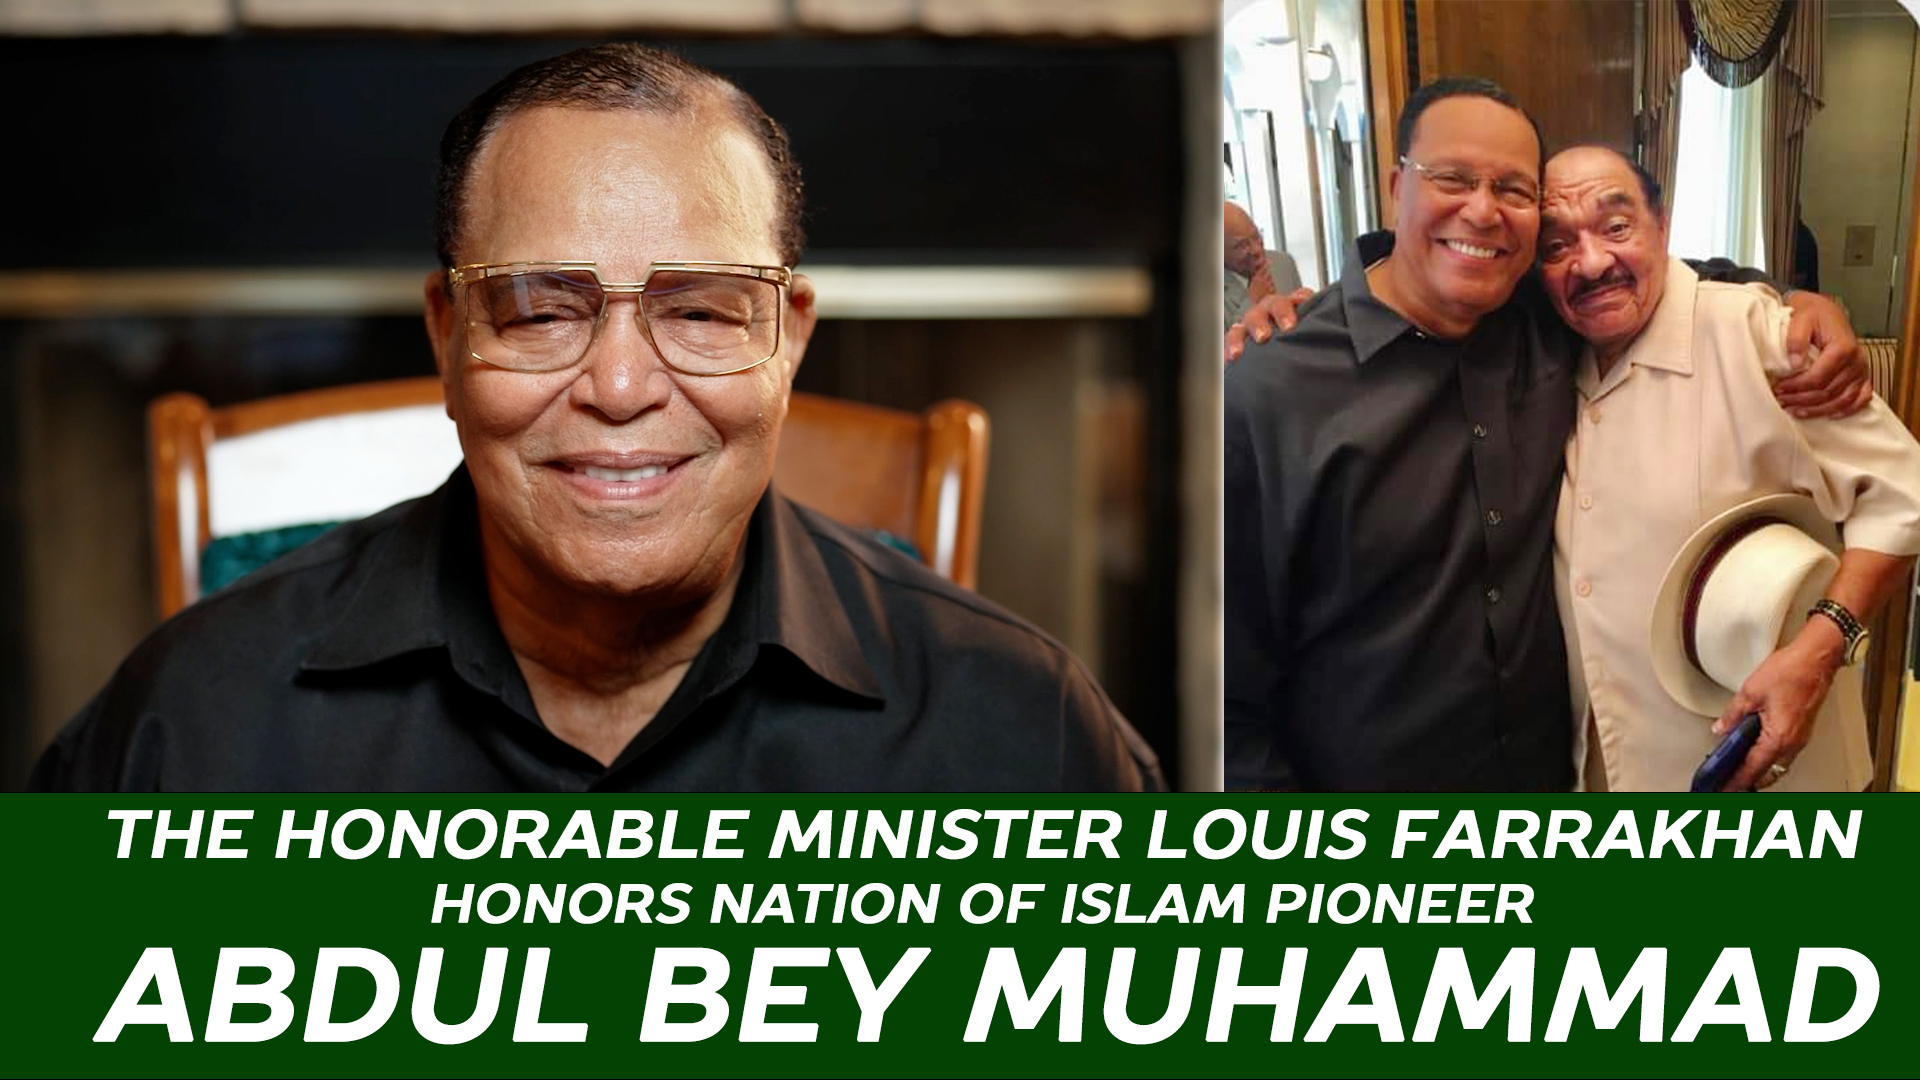 Minister Farrakhan Honors Nation of Islam Pioneer Abdul Bey Muhammad